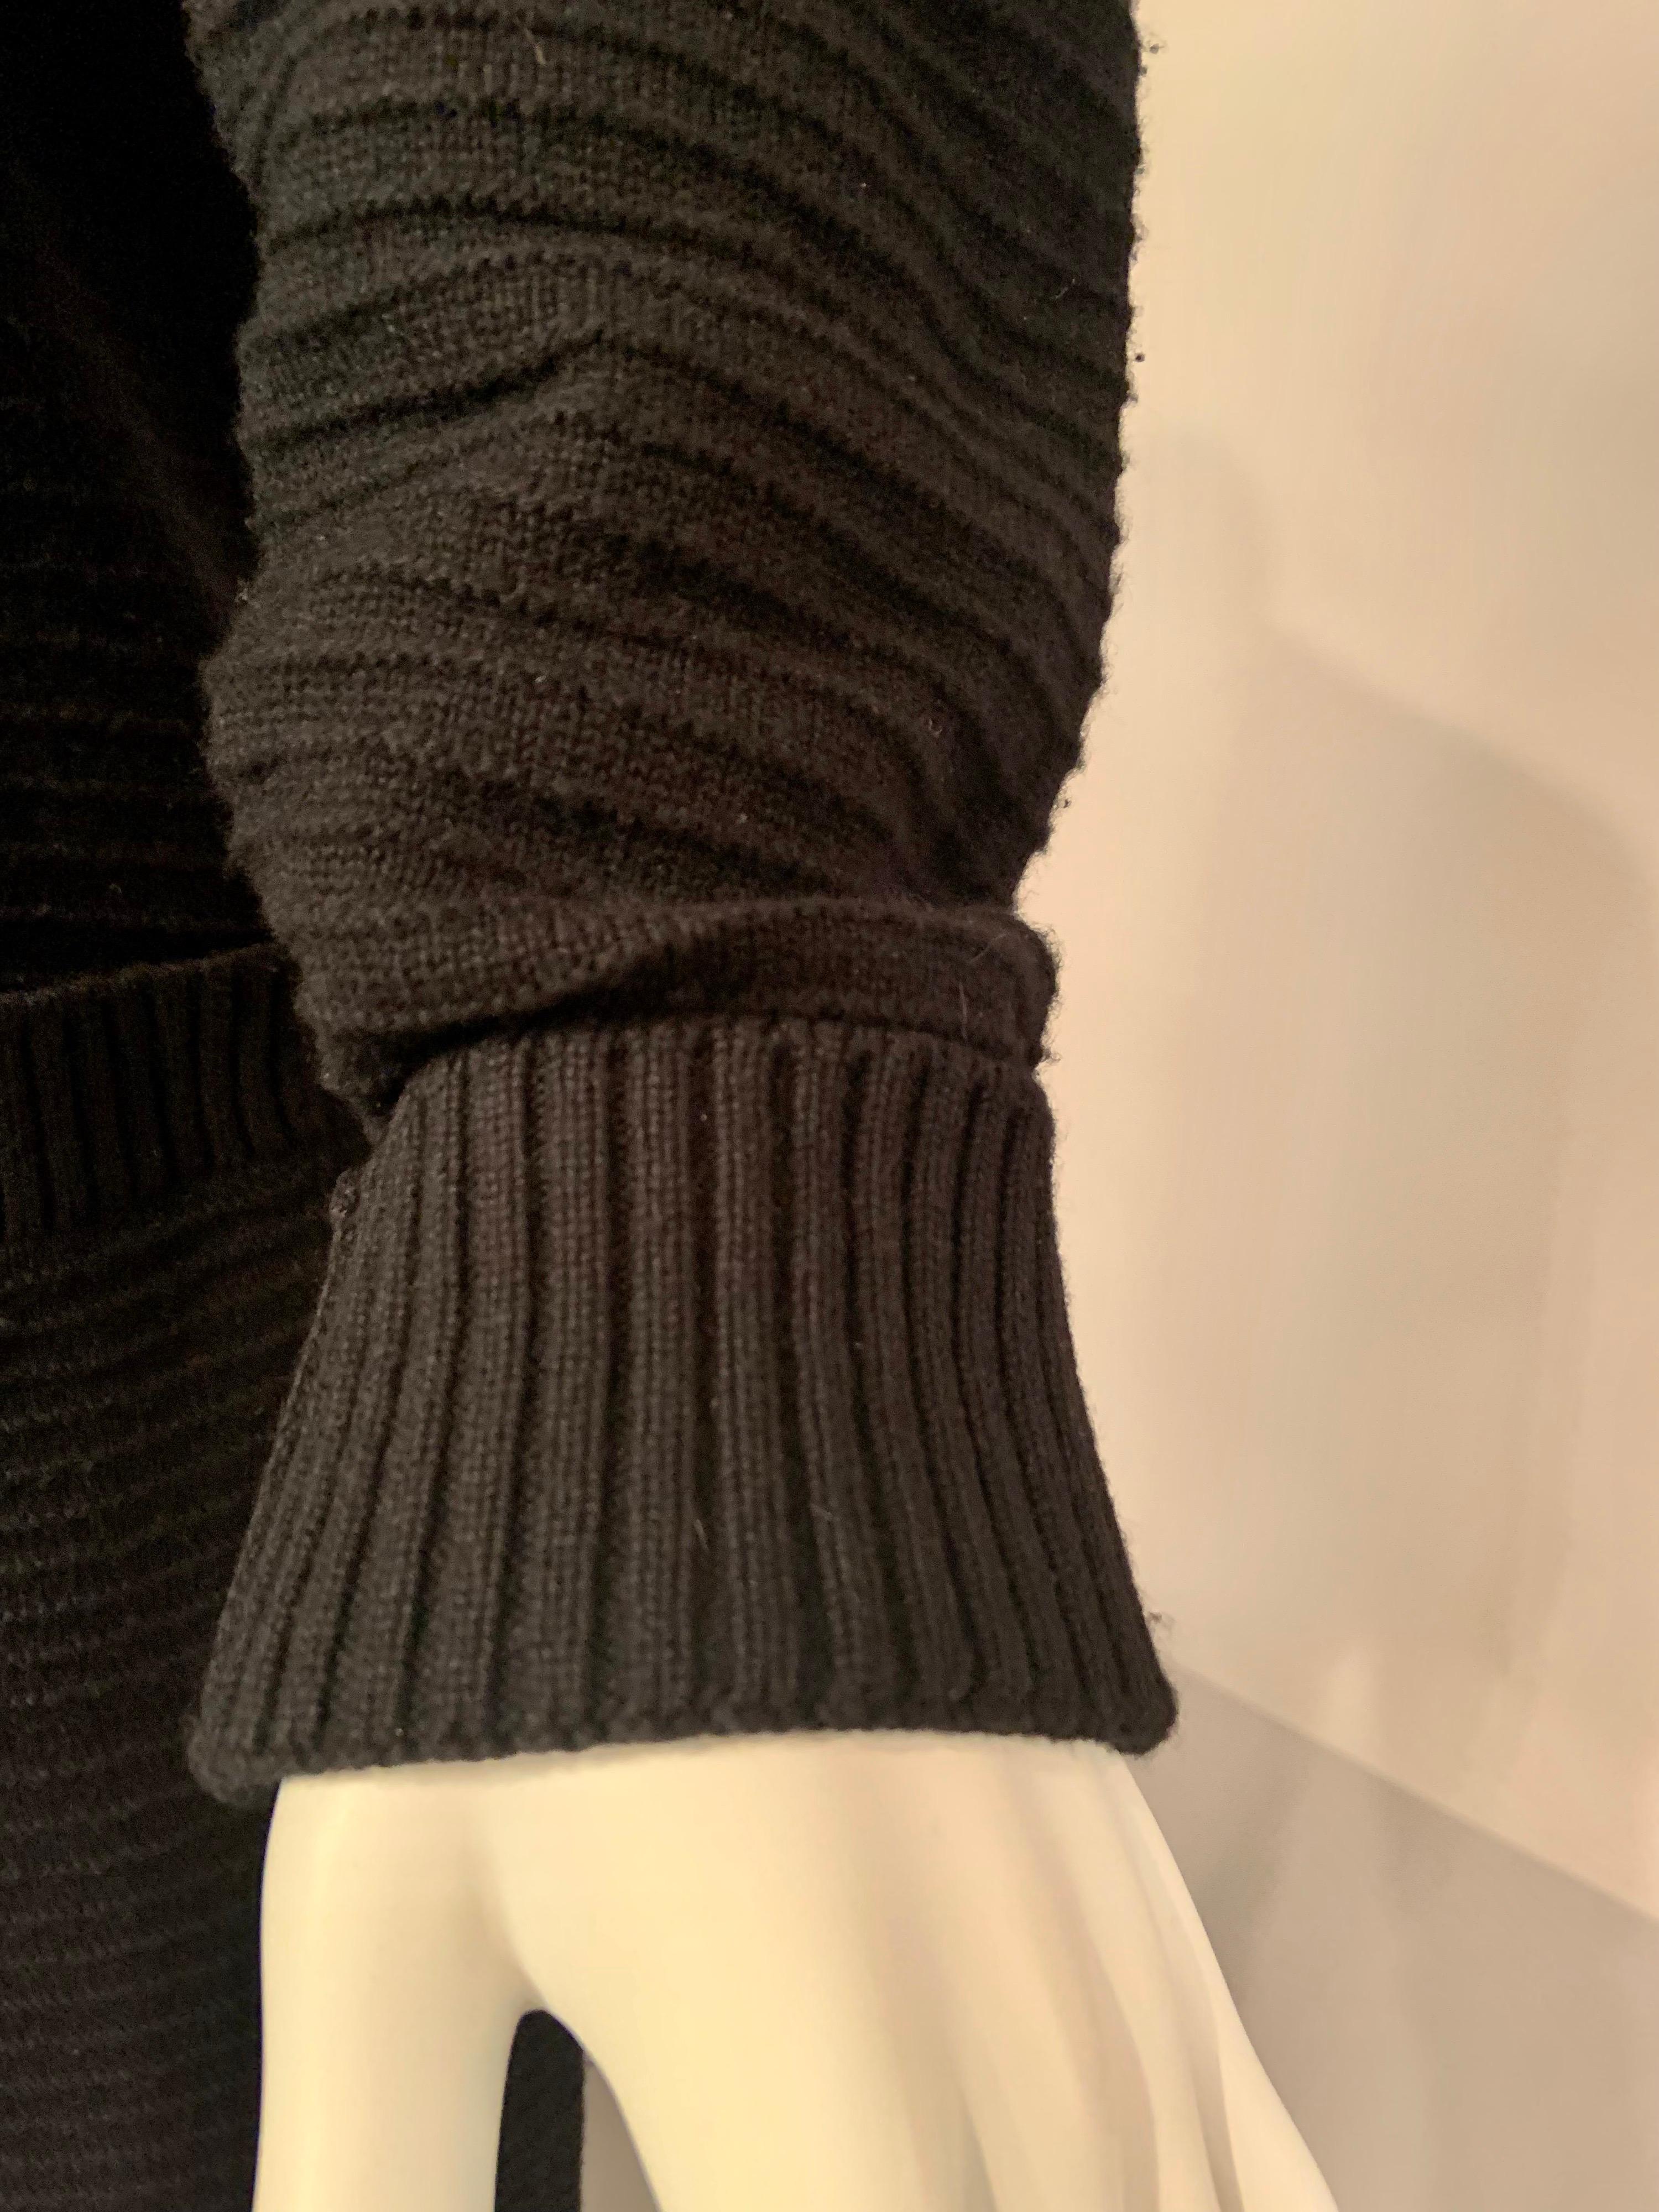 Chanel Black Cashmere Long Cardigan Sweater, Larger Size 1